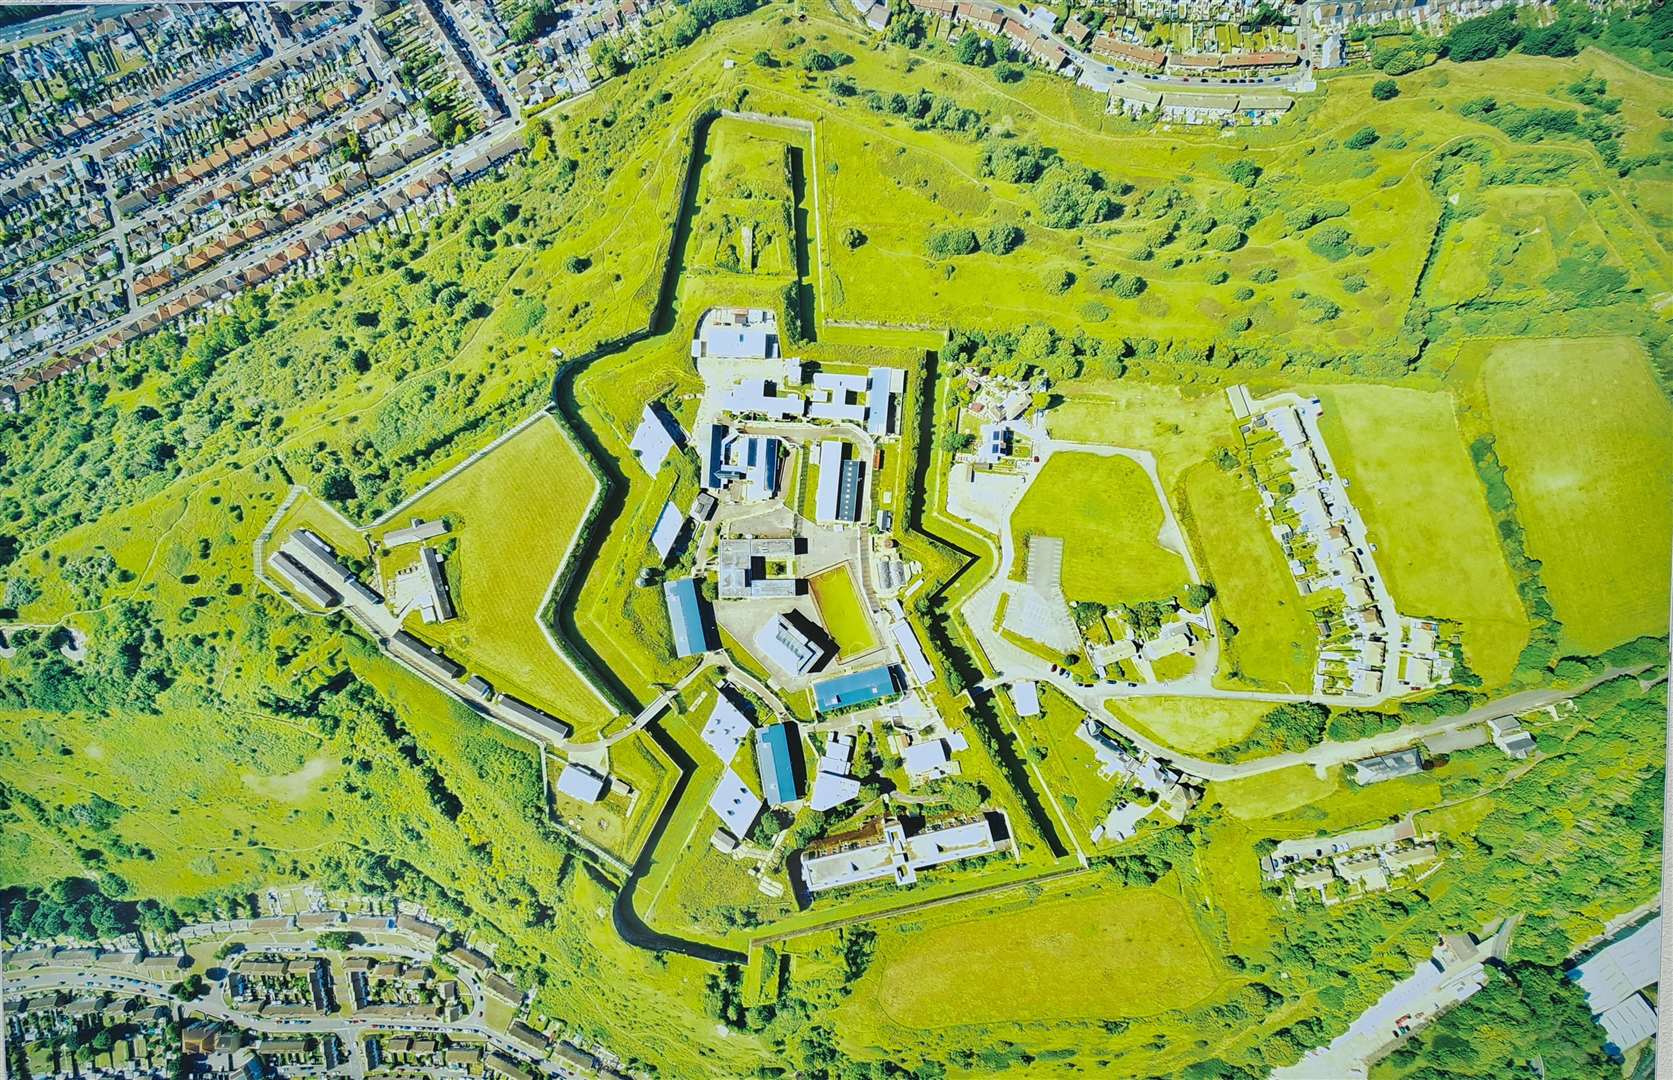 Aerial photograph of the Citadel complex. The distinctive Officers' Quarters are at the bottom. The streets on the top left are in Maxton top right; bottom left, Aycliffe. Original image from Dover Citadel Ltd